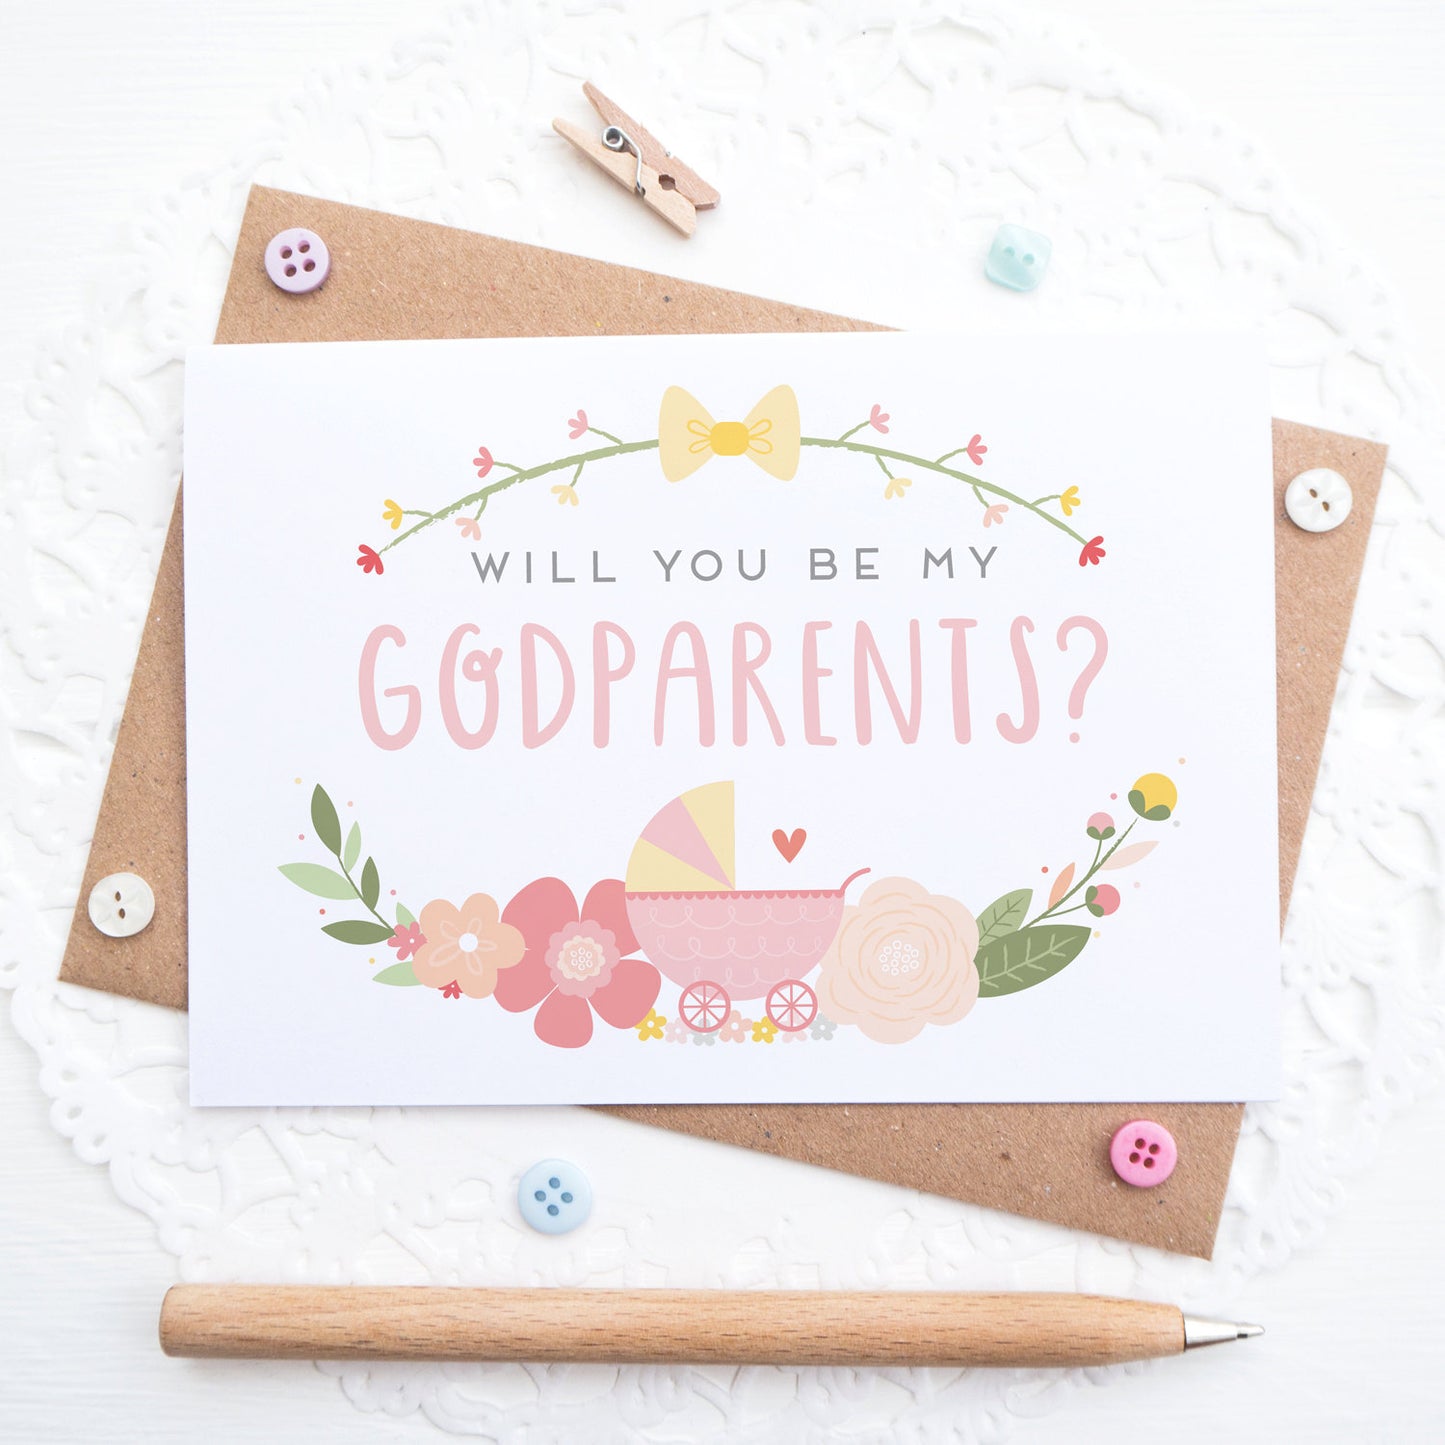 Will you be my Godparents card in pink